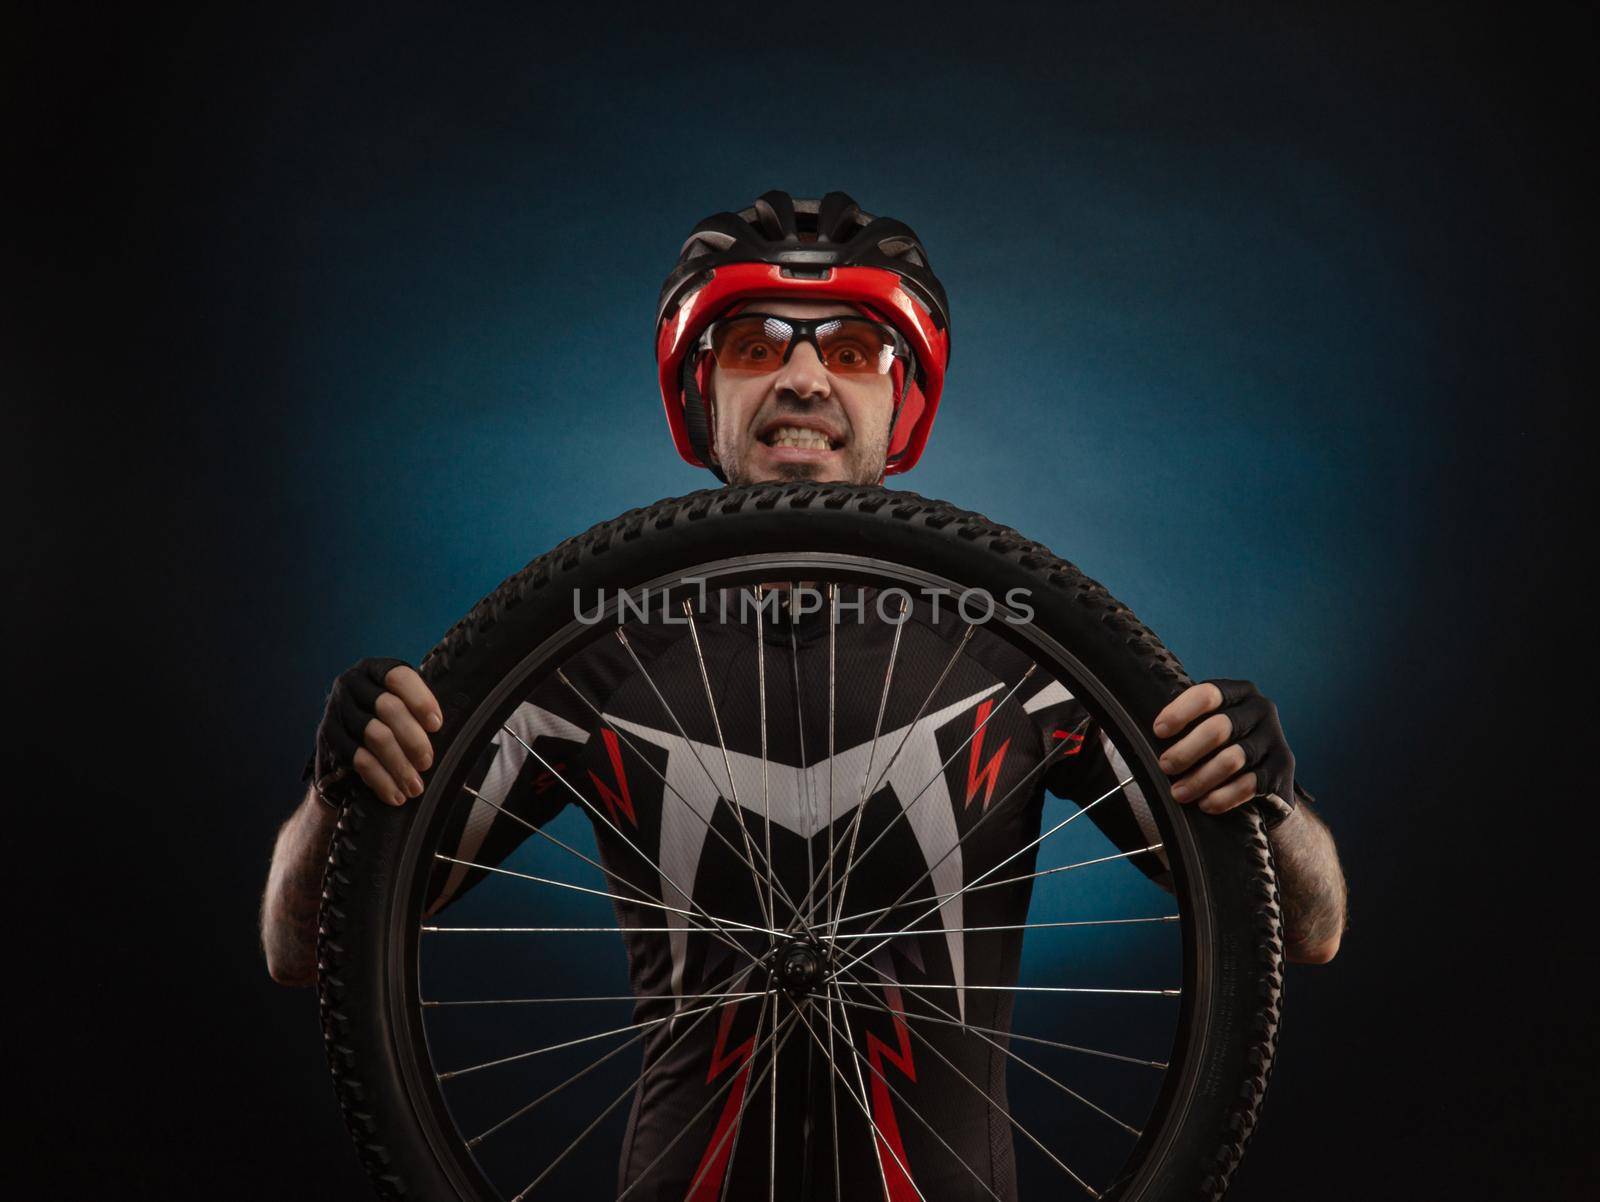 guy-cyclist in a Bicycle helmet with a Bicycle wheel